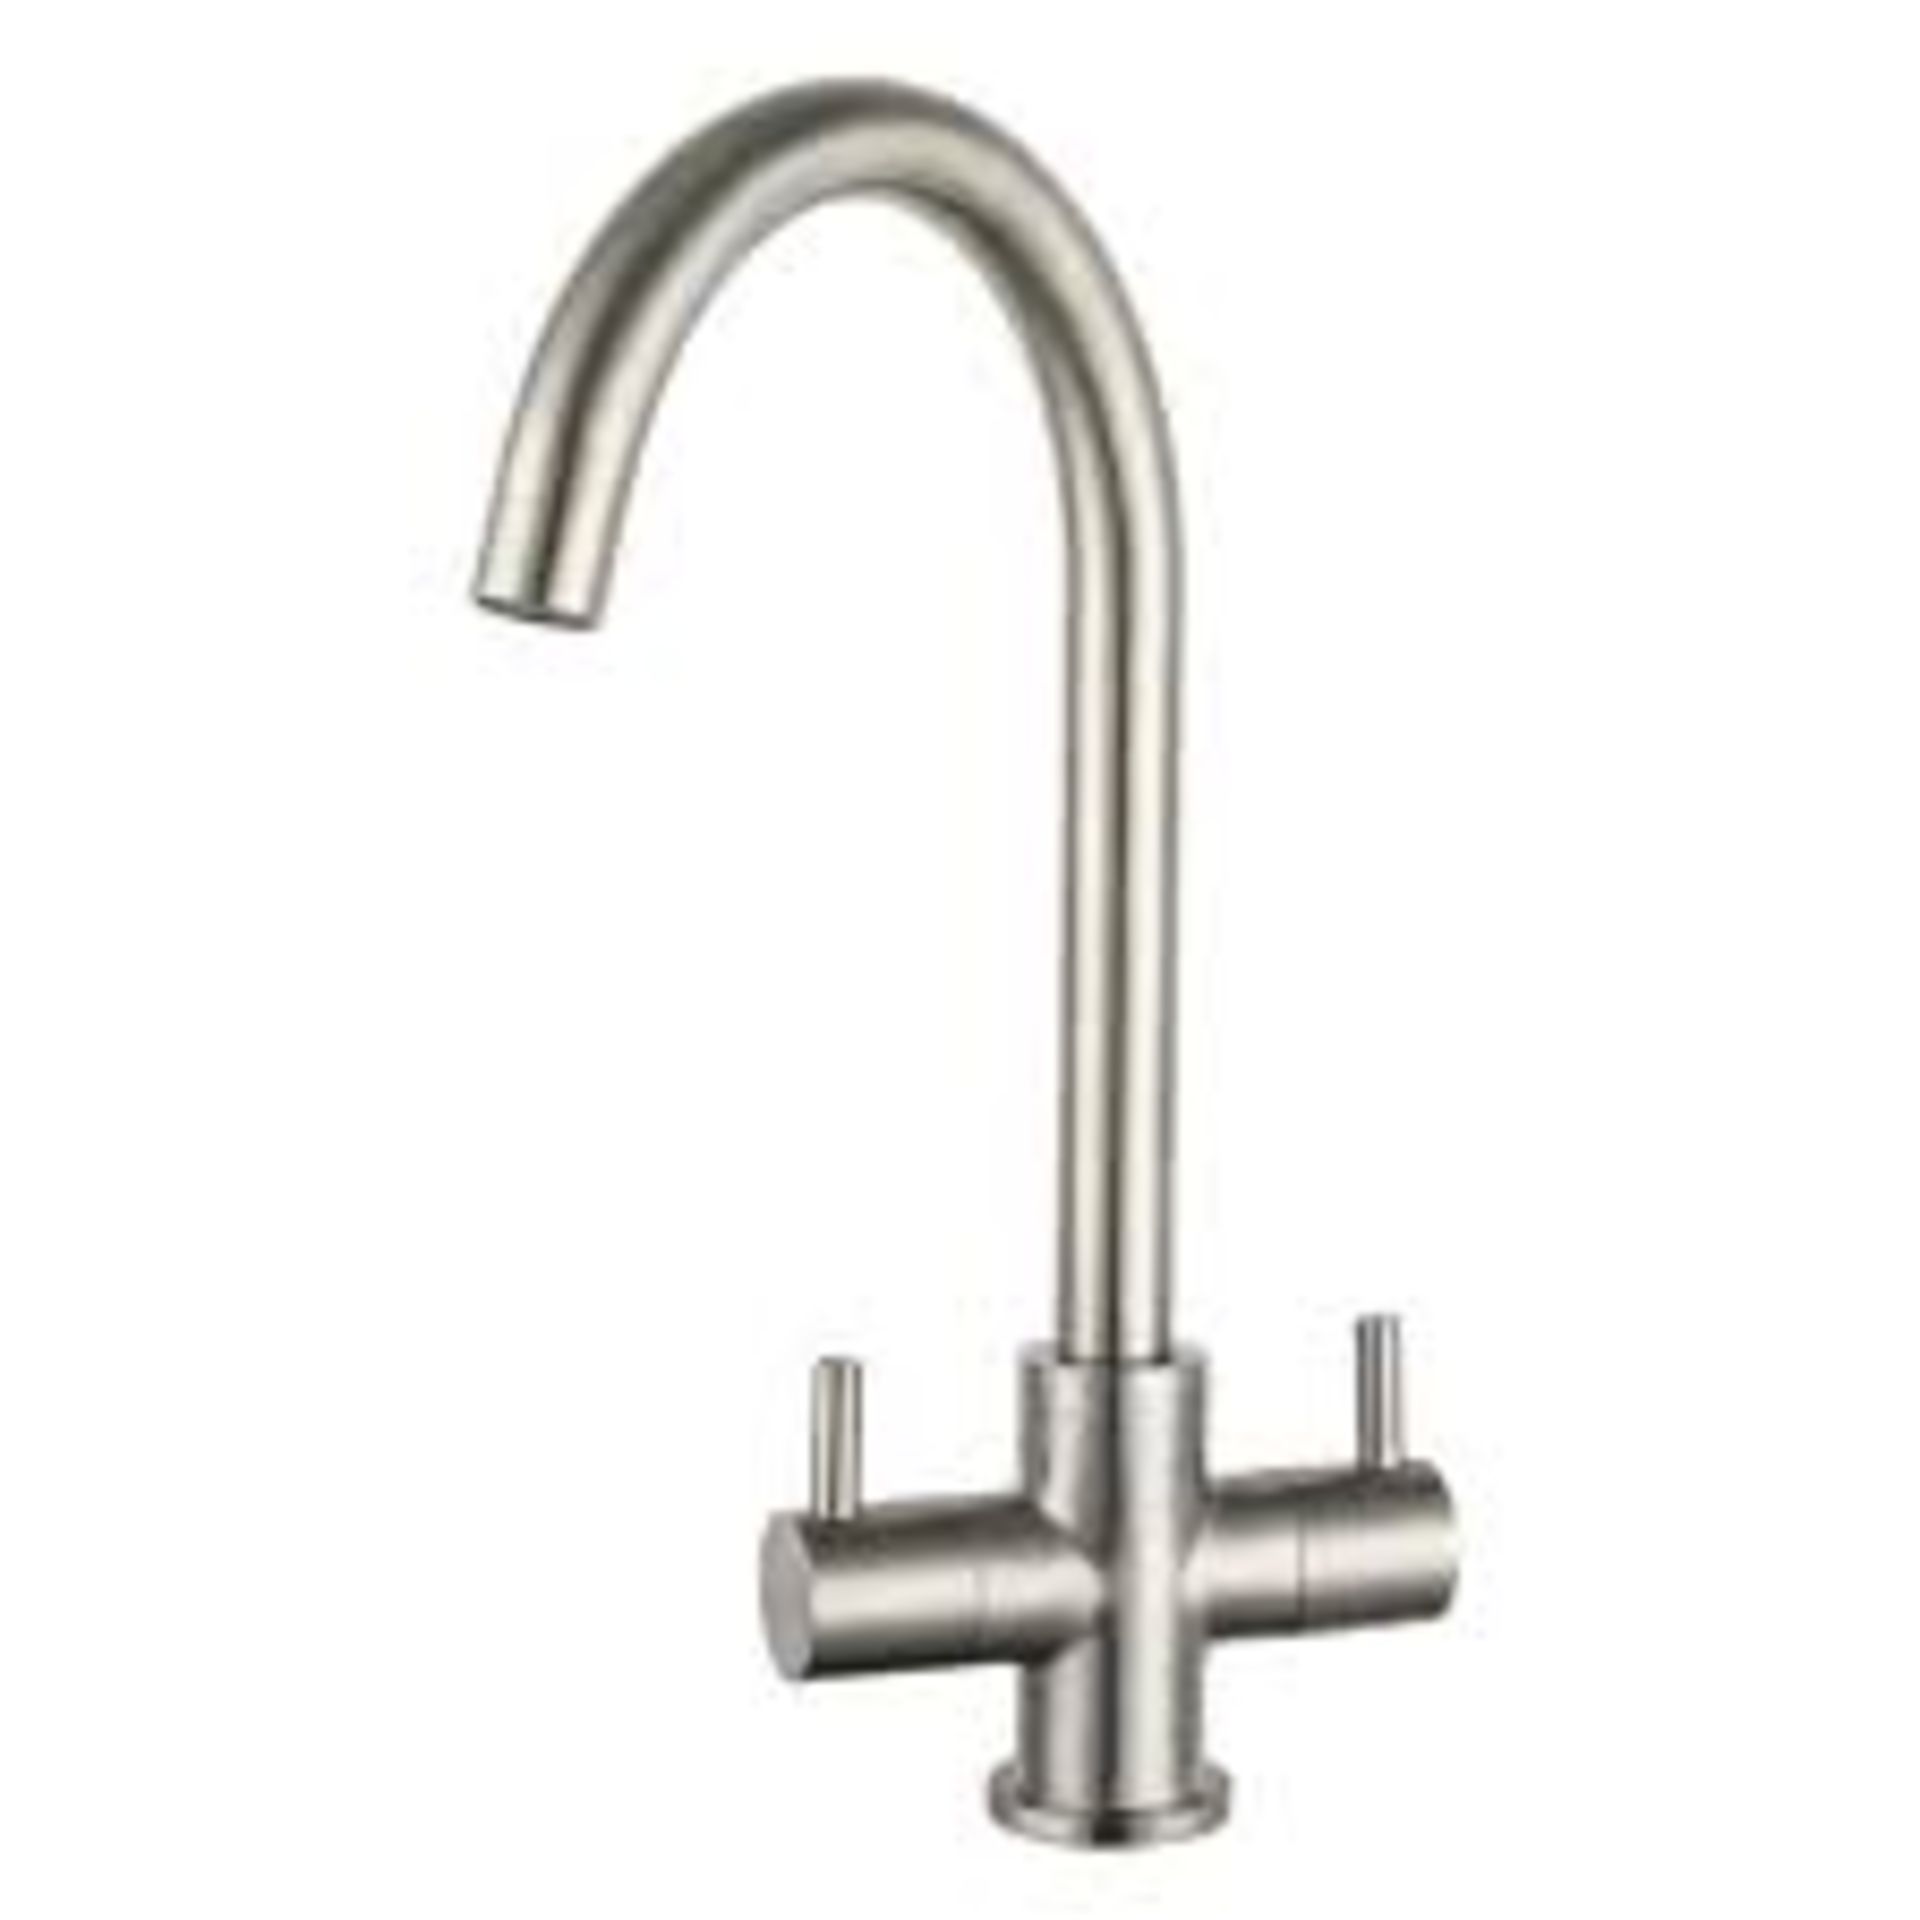 New (K47) Prima Staten Swan Brushed Steel Neck Dual Lever Kitchen Mixer Tap. Brushed Steel Fini...